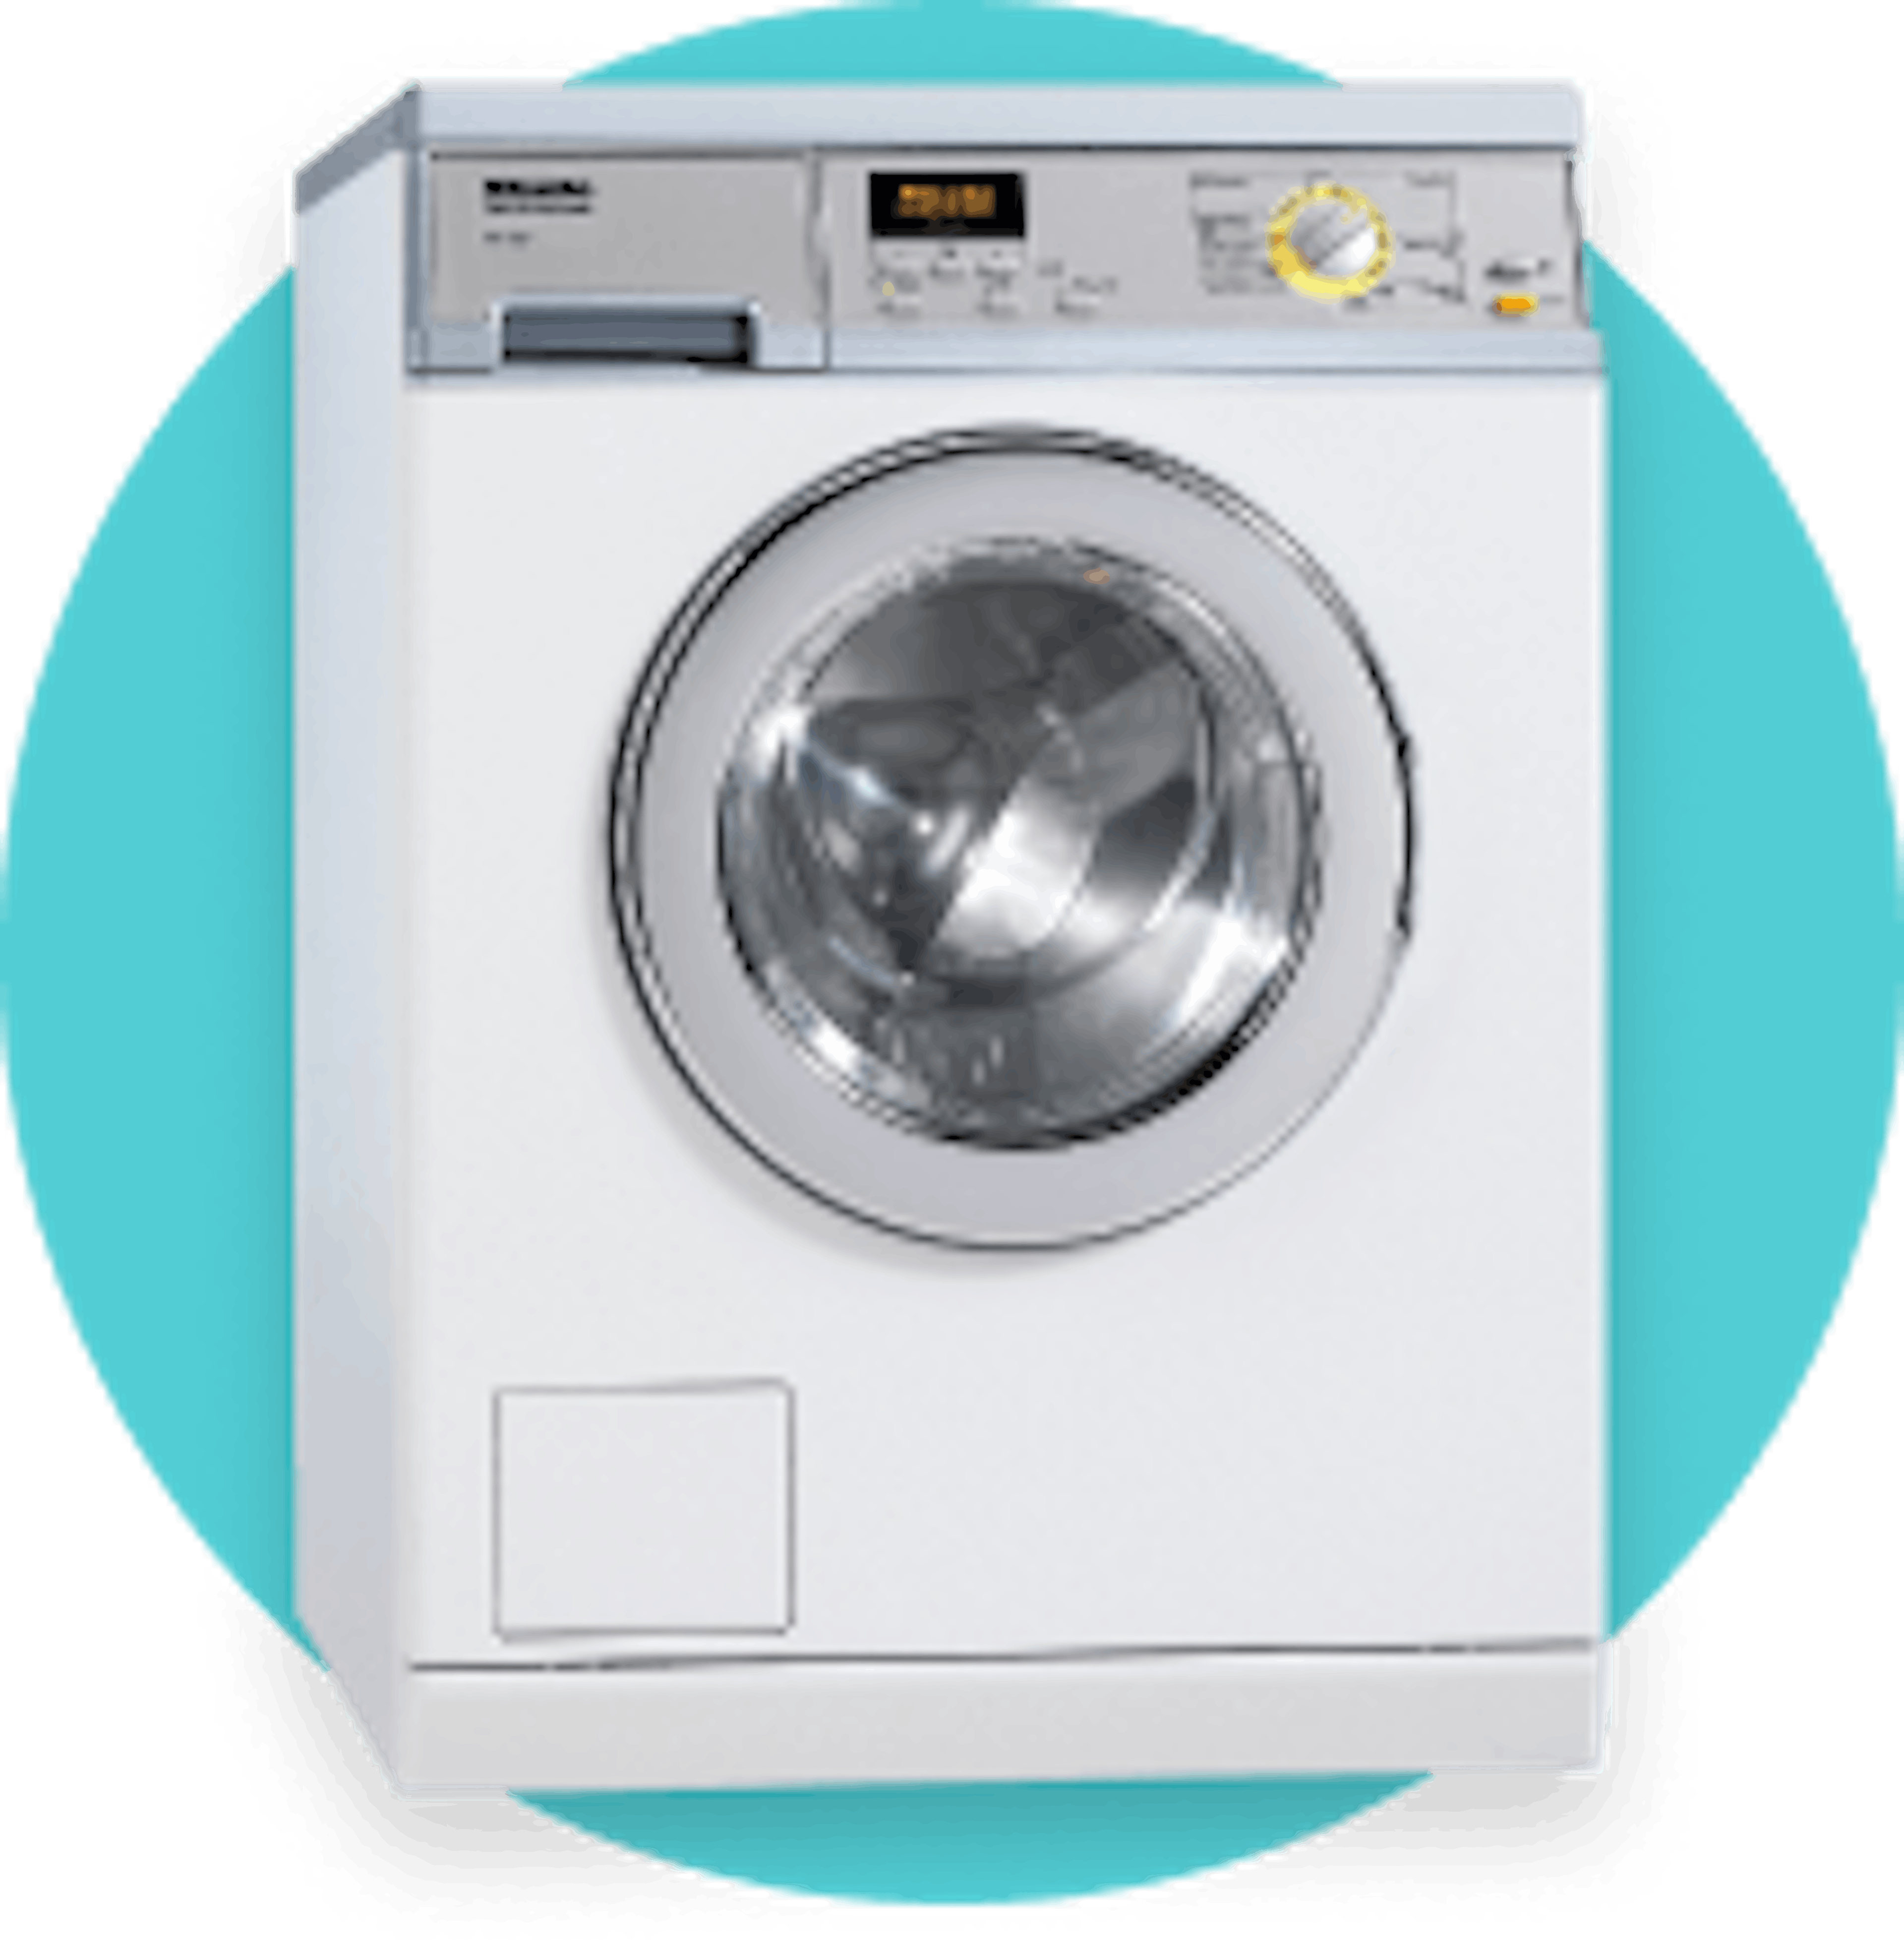 Icon with Miele Washer on turquoise background